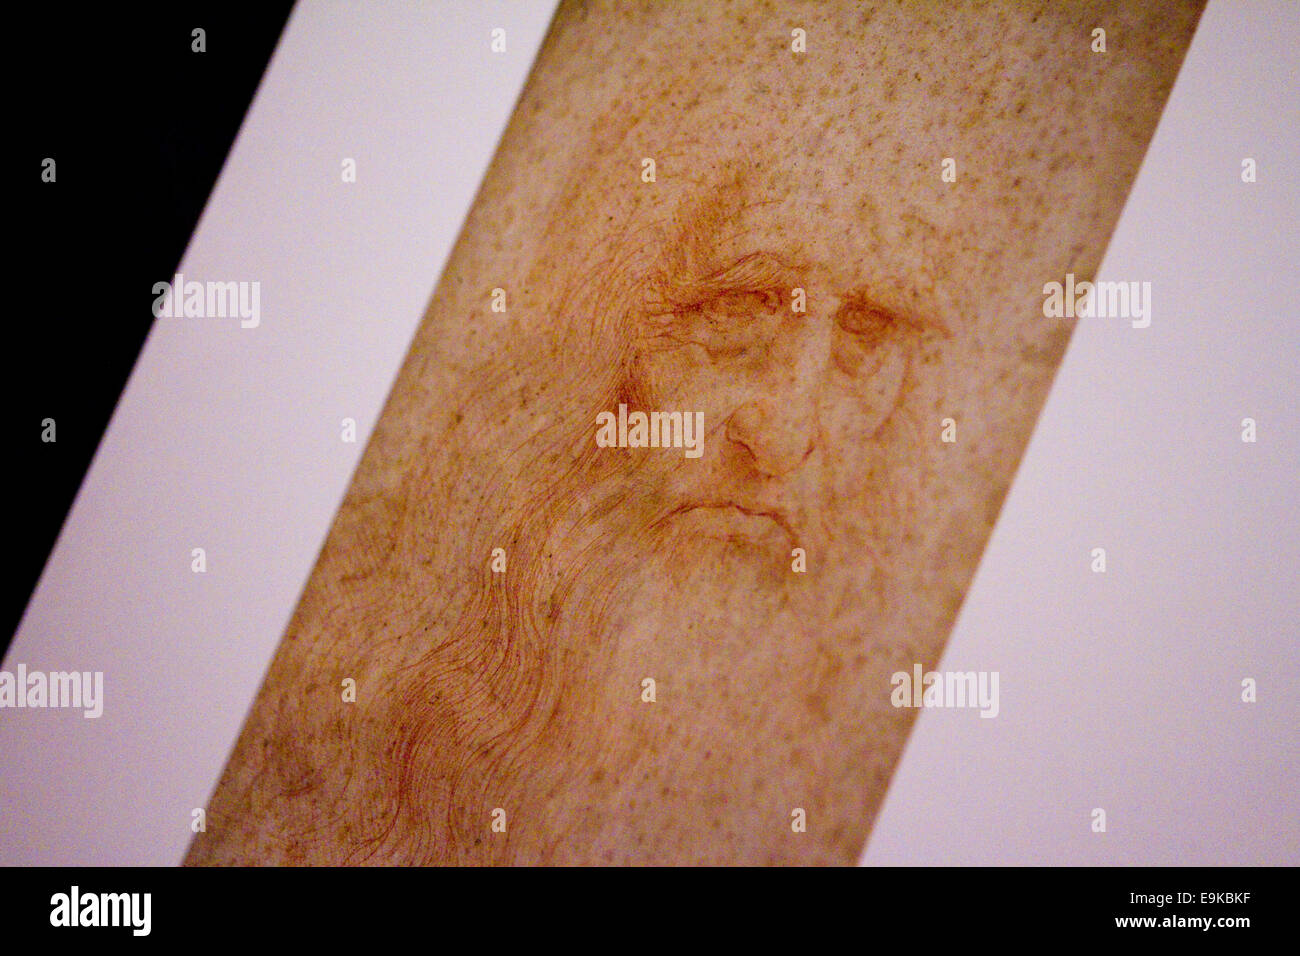 Torino, Italy. 28th October 2014. Detail of Leonardo da Vinci self portrait (portrait of a man in red chalk). An exhibition of Leonardo and other artist drawings opens in the vaults of the Royal Library of Torino, Italy. Stock Photo